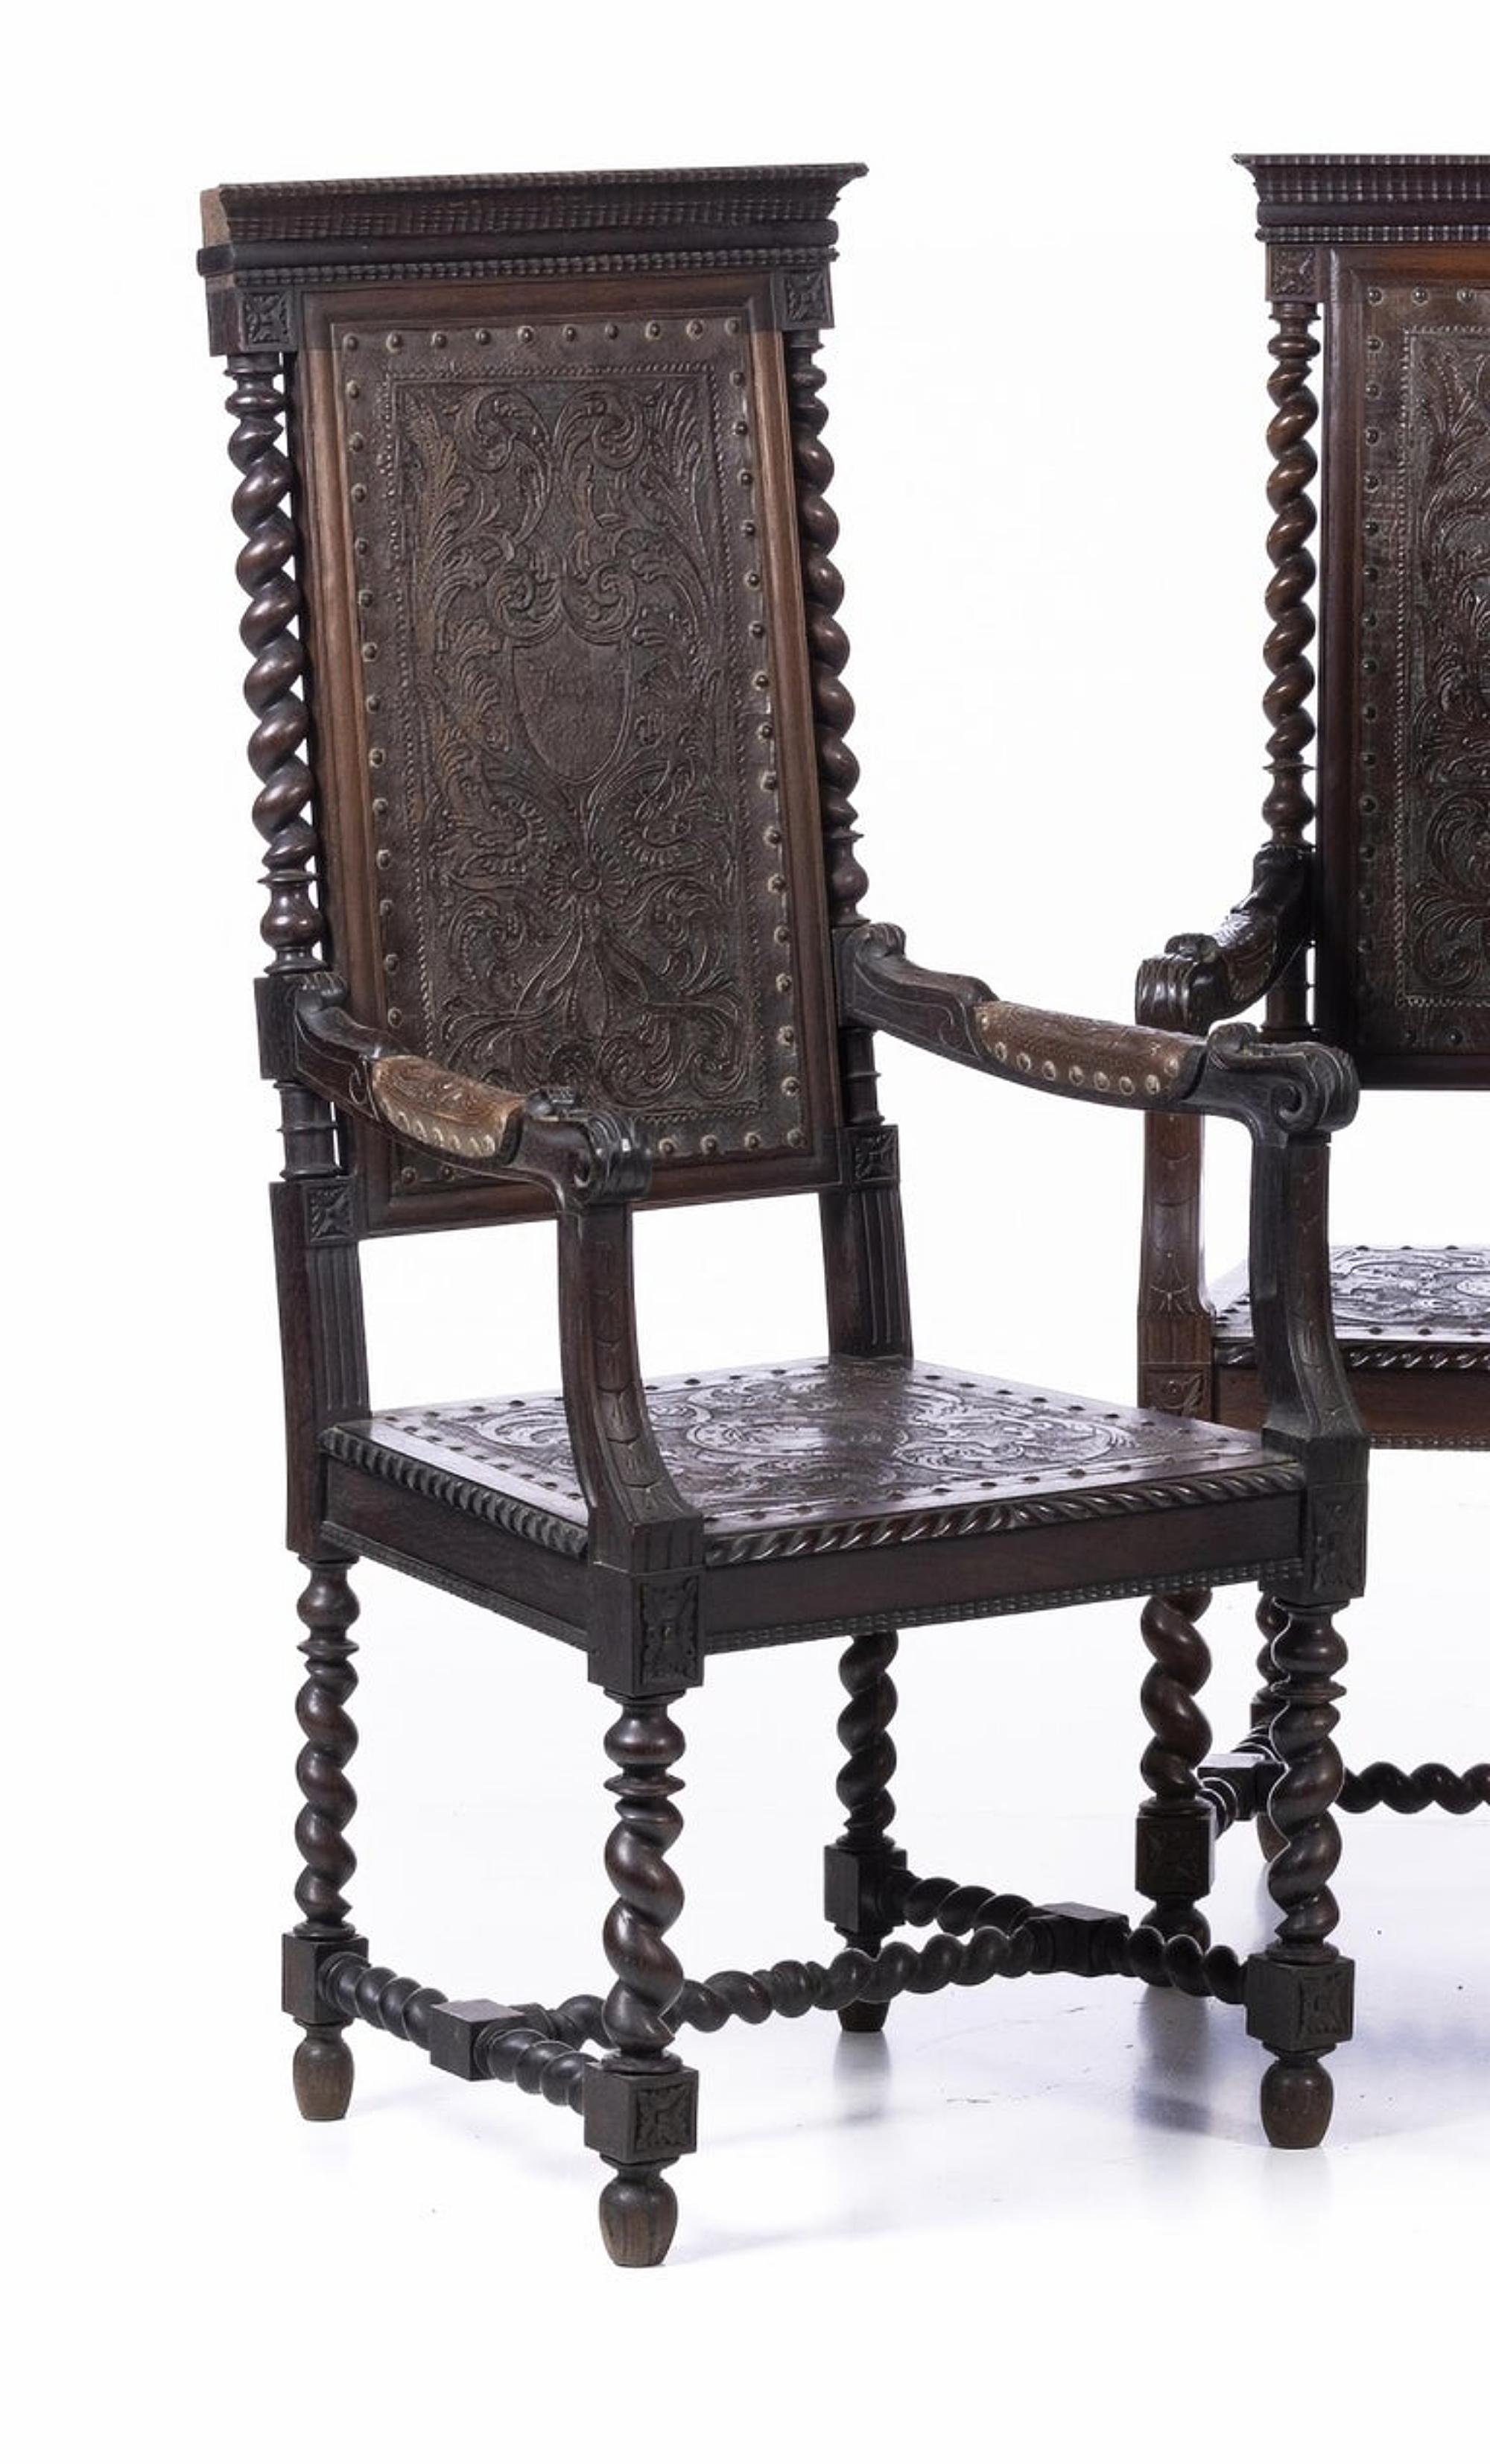 Set of four armchairs

Portuguese from the 18th Century,
in chestnut and Brazilian rosewood wood with carvings. 
Scalloped backrest and carved leather seat, roll-up arms, turned legs. 
Dim.: 125 x 51 x 52 xm.
very good condition.